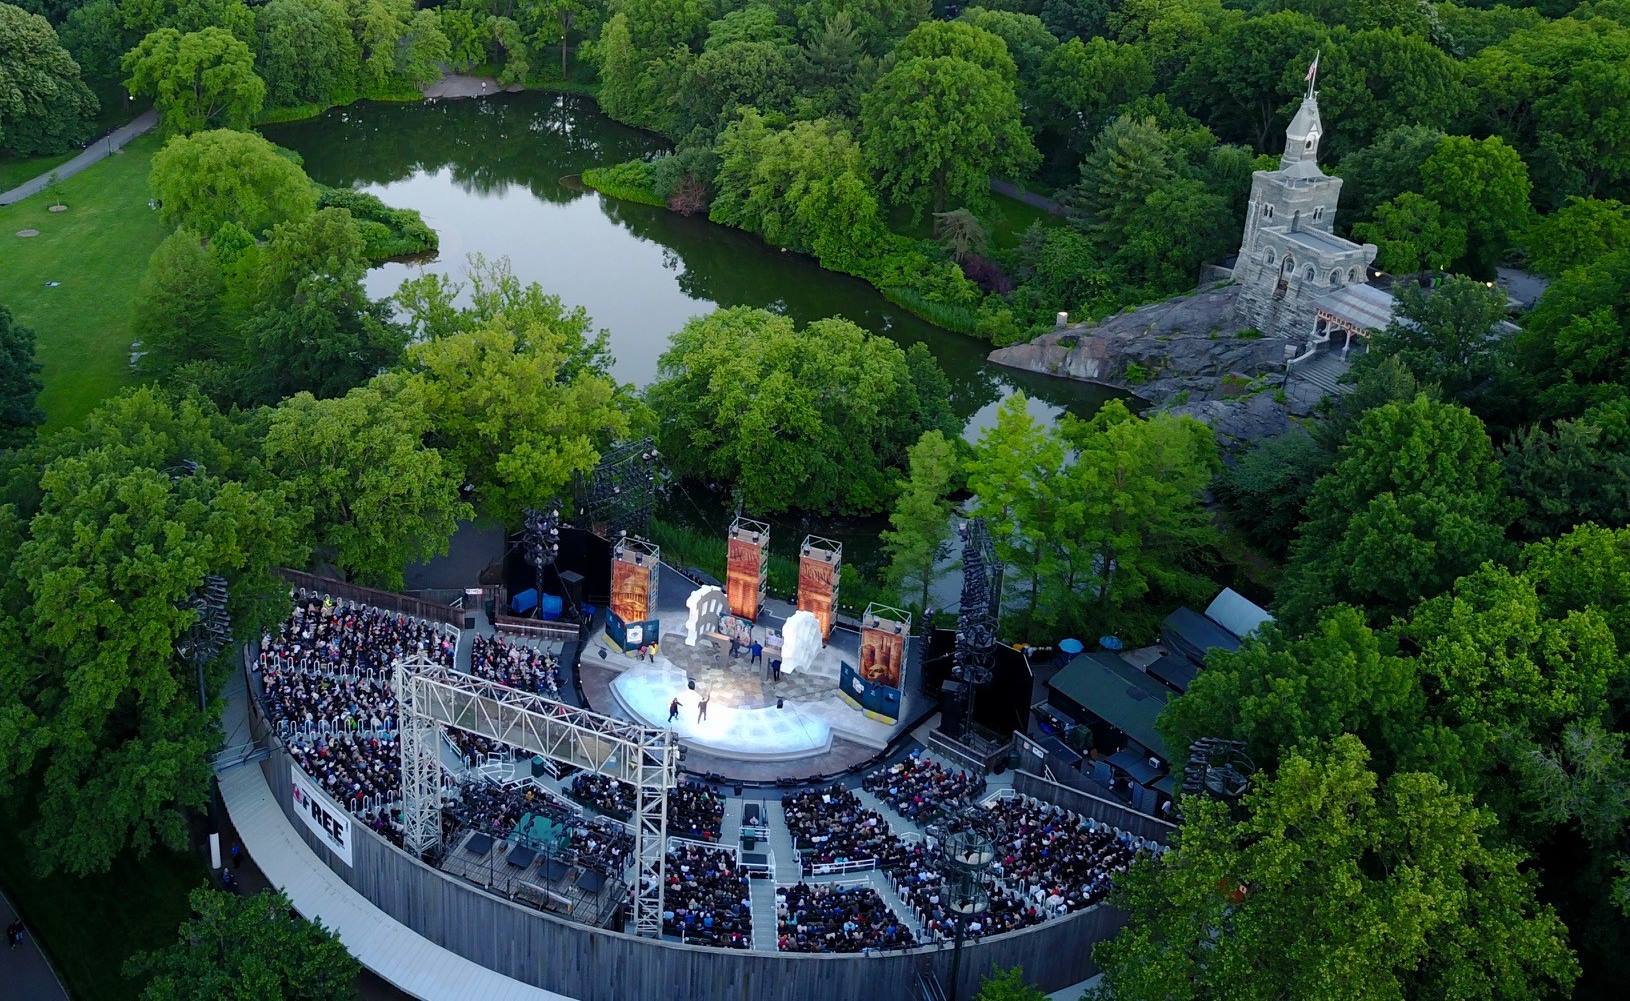 Free Shakespeare in the Park